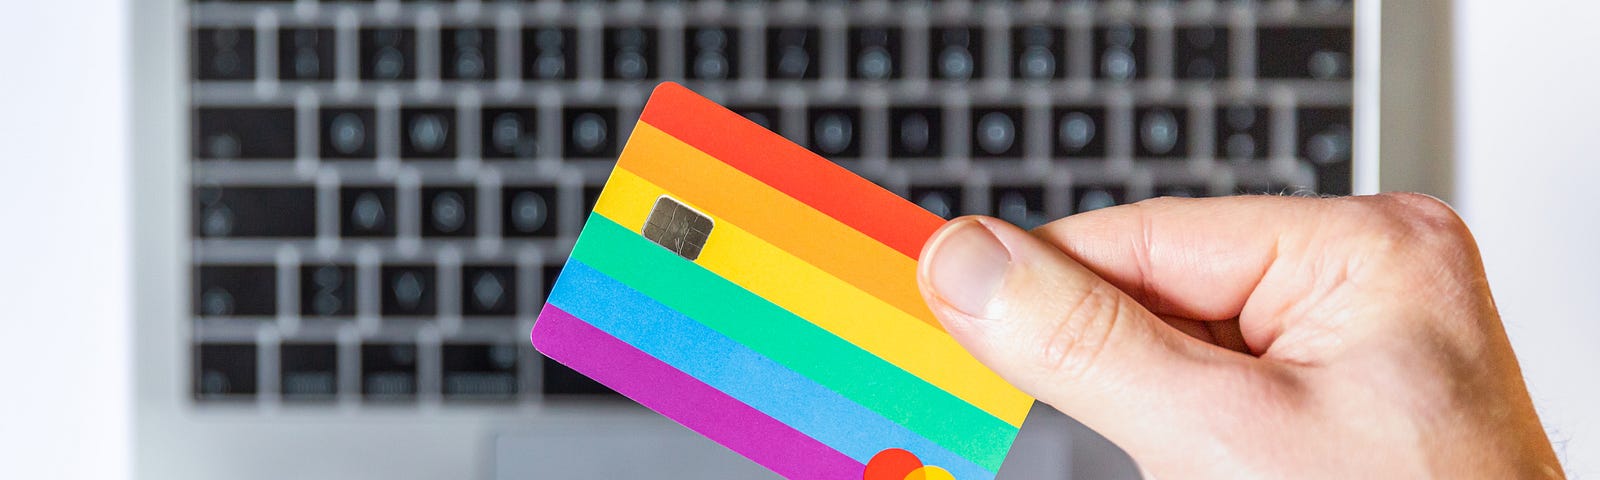 rainbow hued credit card held in front of a keyboard.